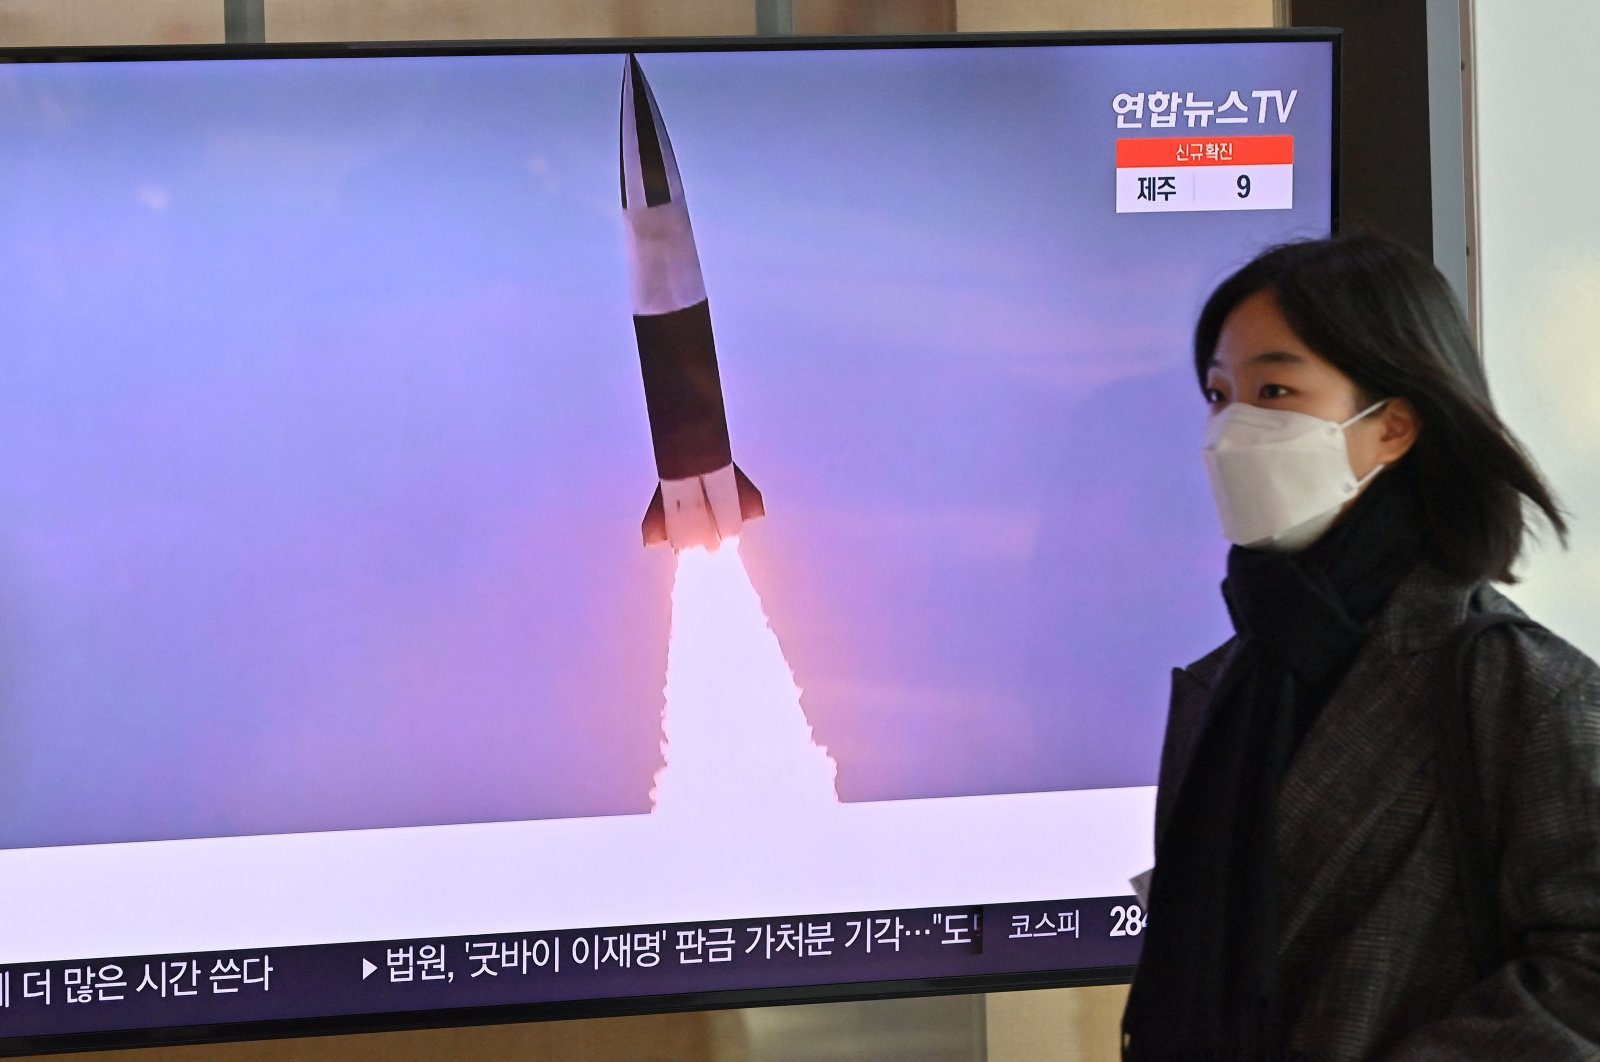 A woman walks past a television screen showing a news broadcast with file footage of a North Korean missile test, Seoul, South Korea, Jan. 20, 2022. (AFP Photo)